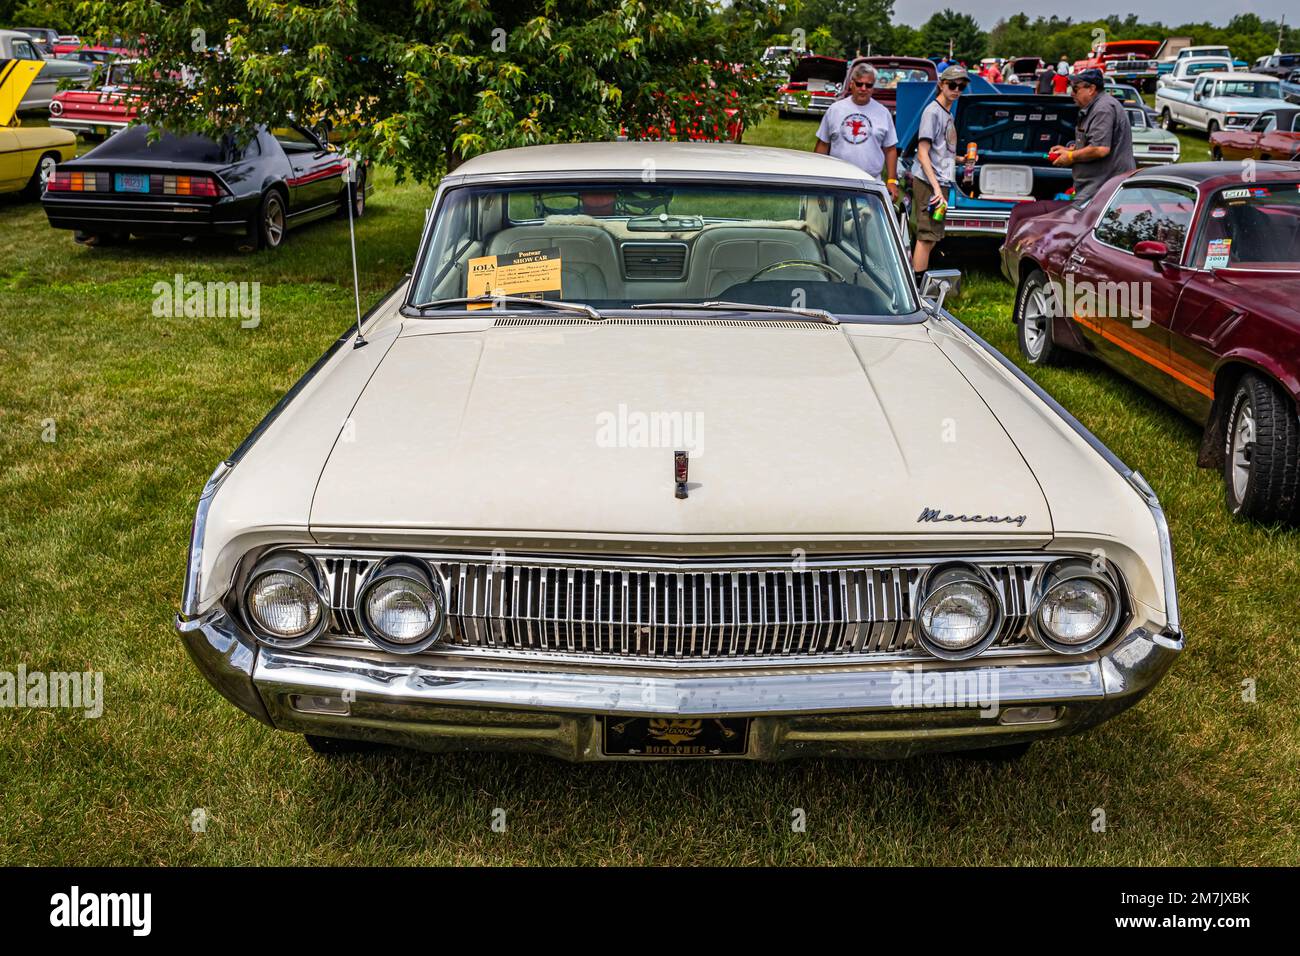 Iola, WI - July 07, 2022: High perspective front view of a 1964 Mercury Park Lane Marauder 2 Door Hardtop at a local car show. Stock Photo